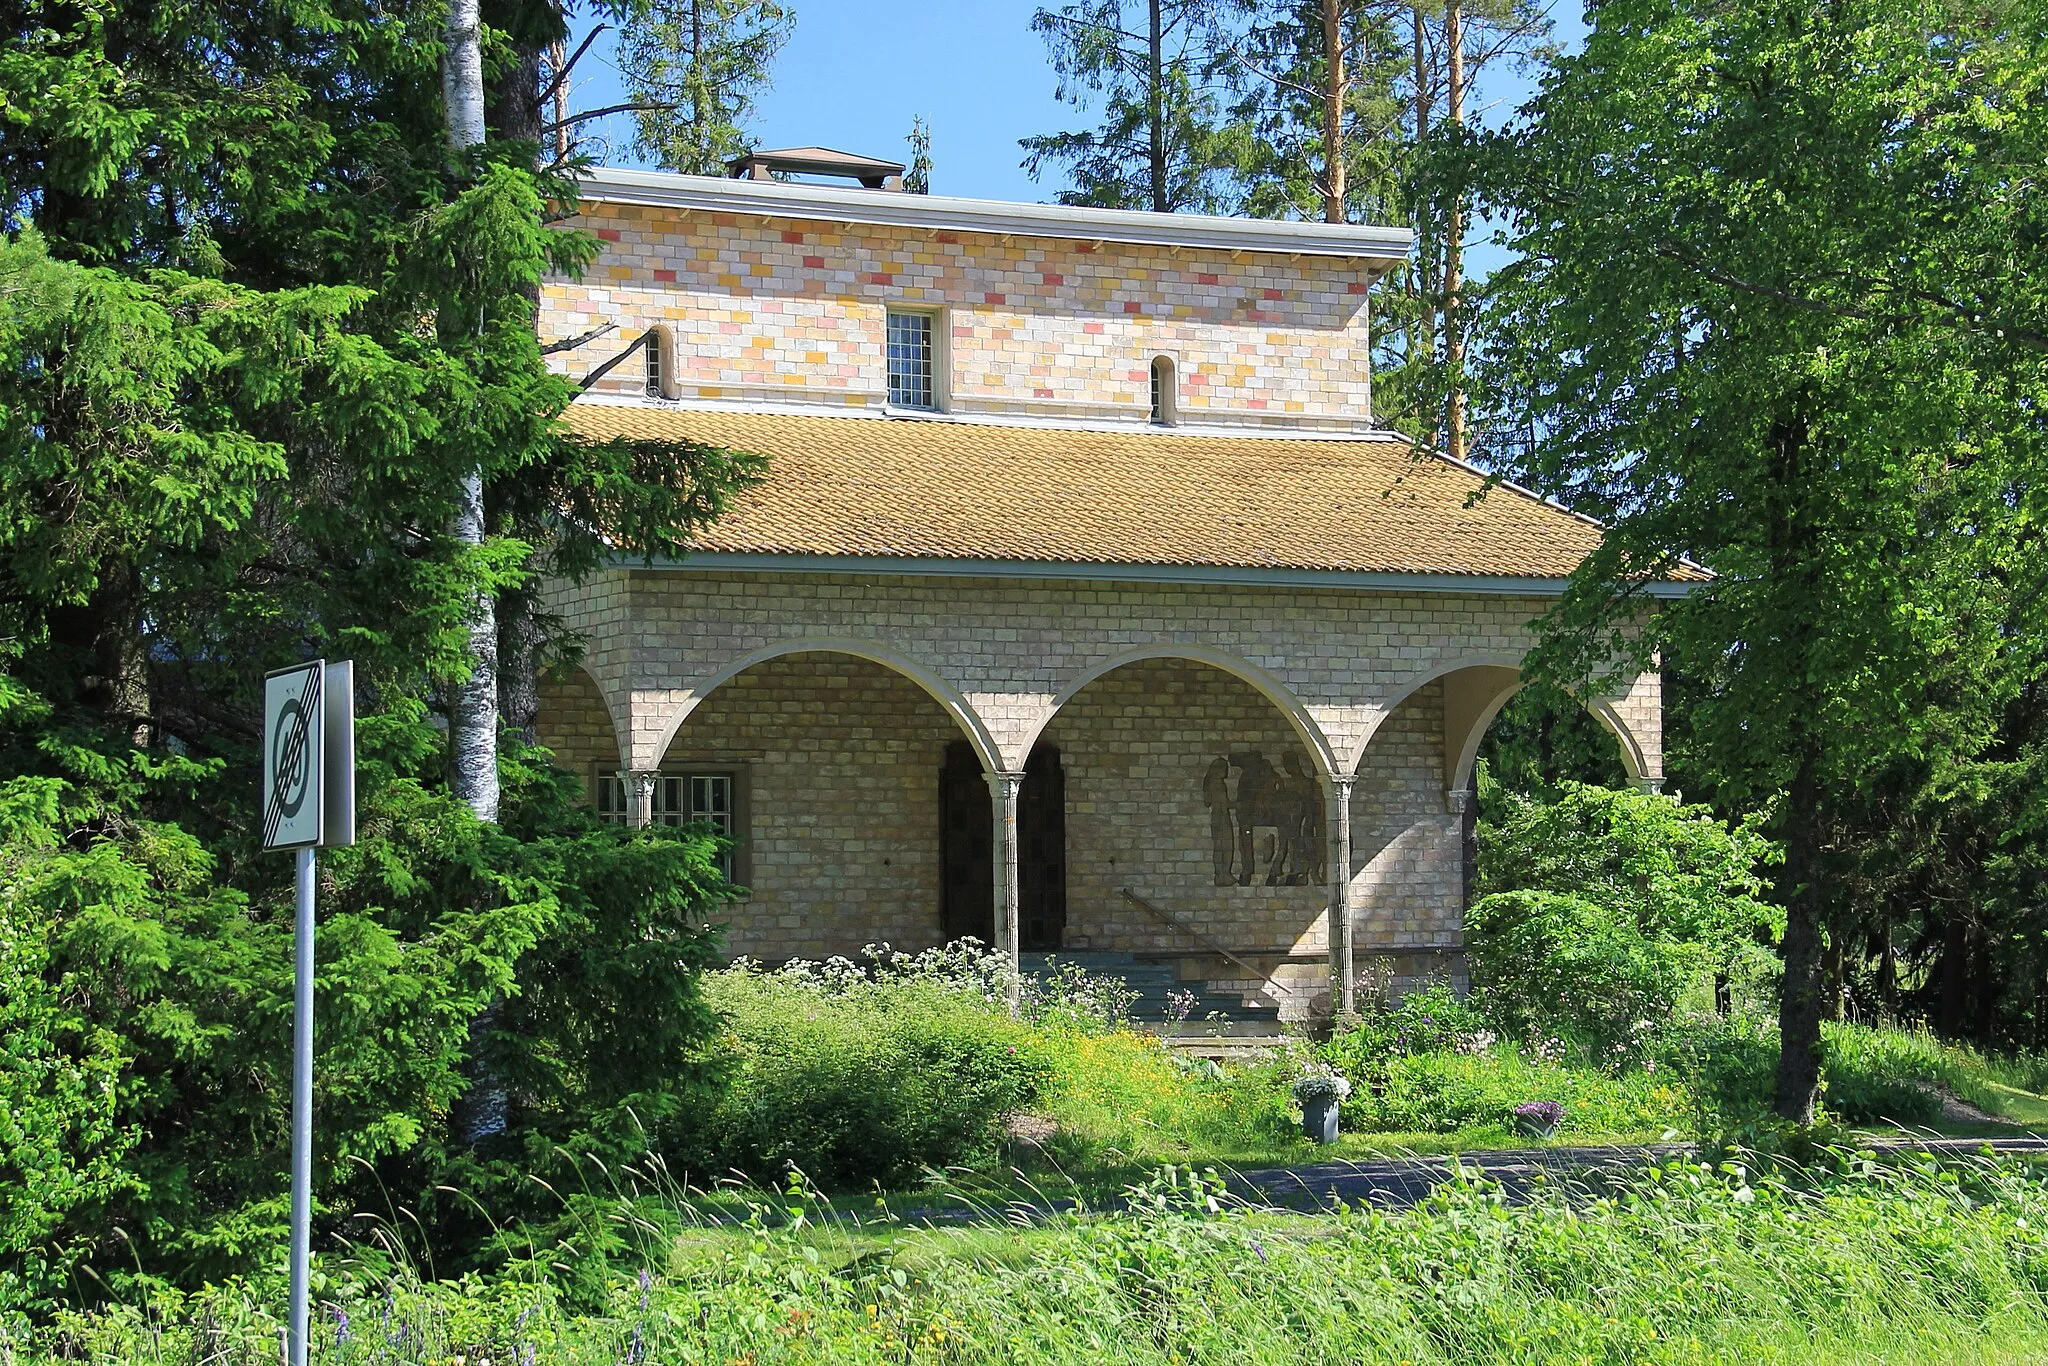 Photo showing: Villa Ville, Oripää, Suomi. - Villa Ville was family home of painter, sculptor and teacher Viljo Syrjämä (1914-1976). There was alko his studio. He built his home including bricks and furniture entirely by himself. It was inspired by Convent of San Marco in Florence, Italy.